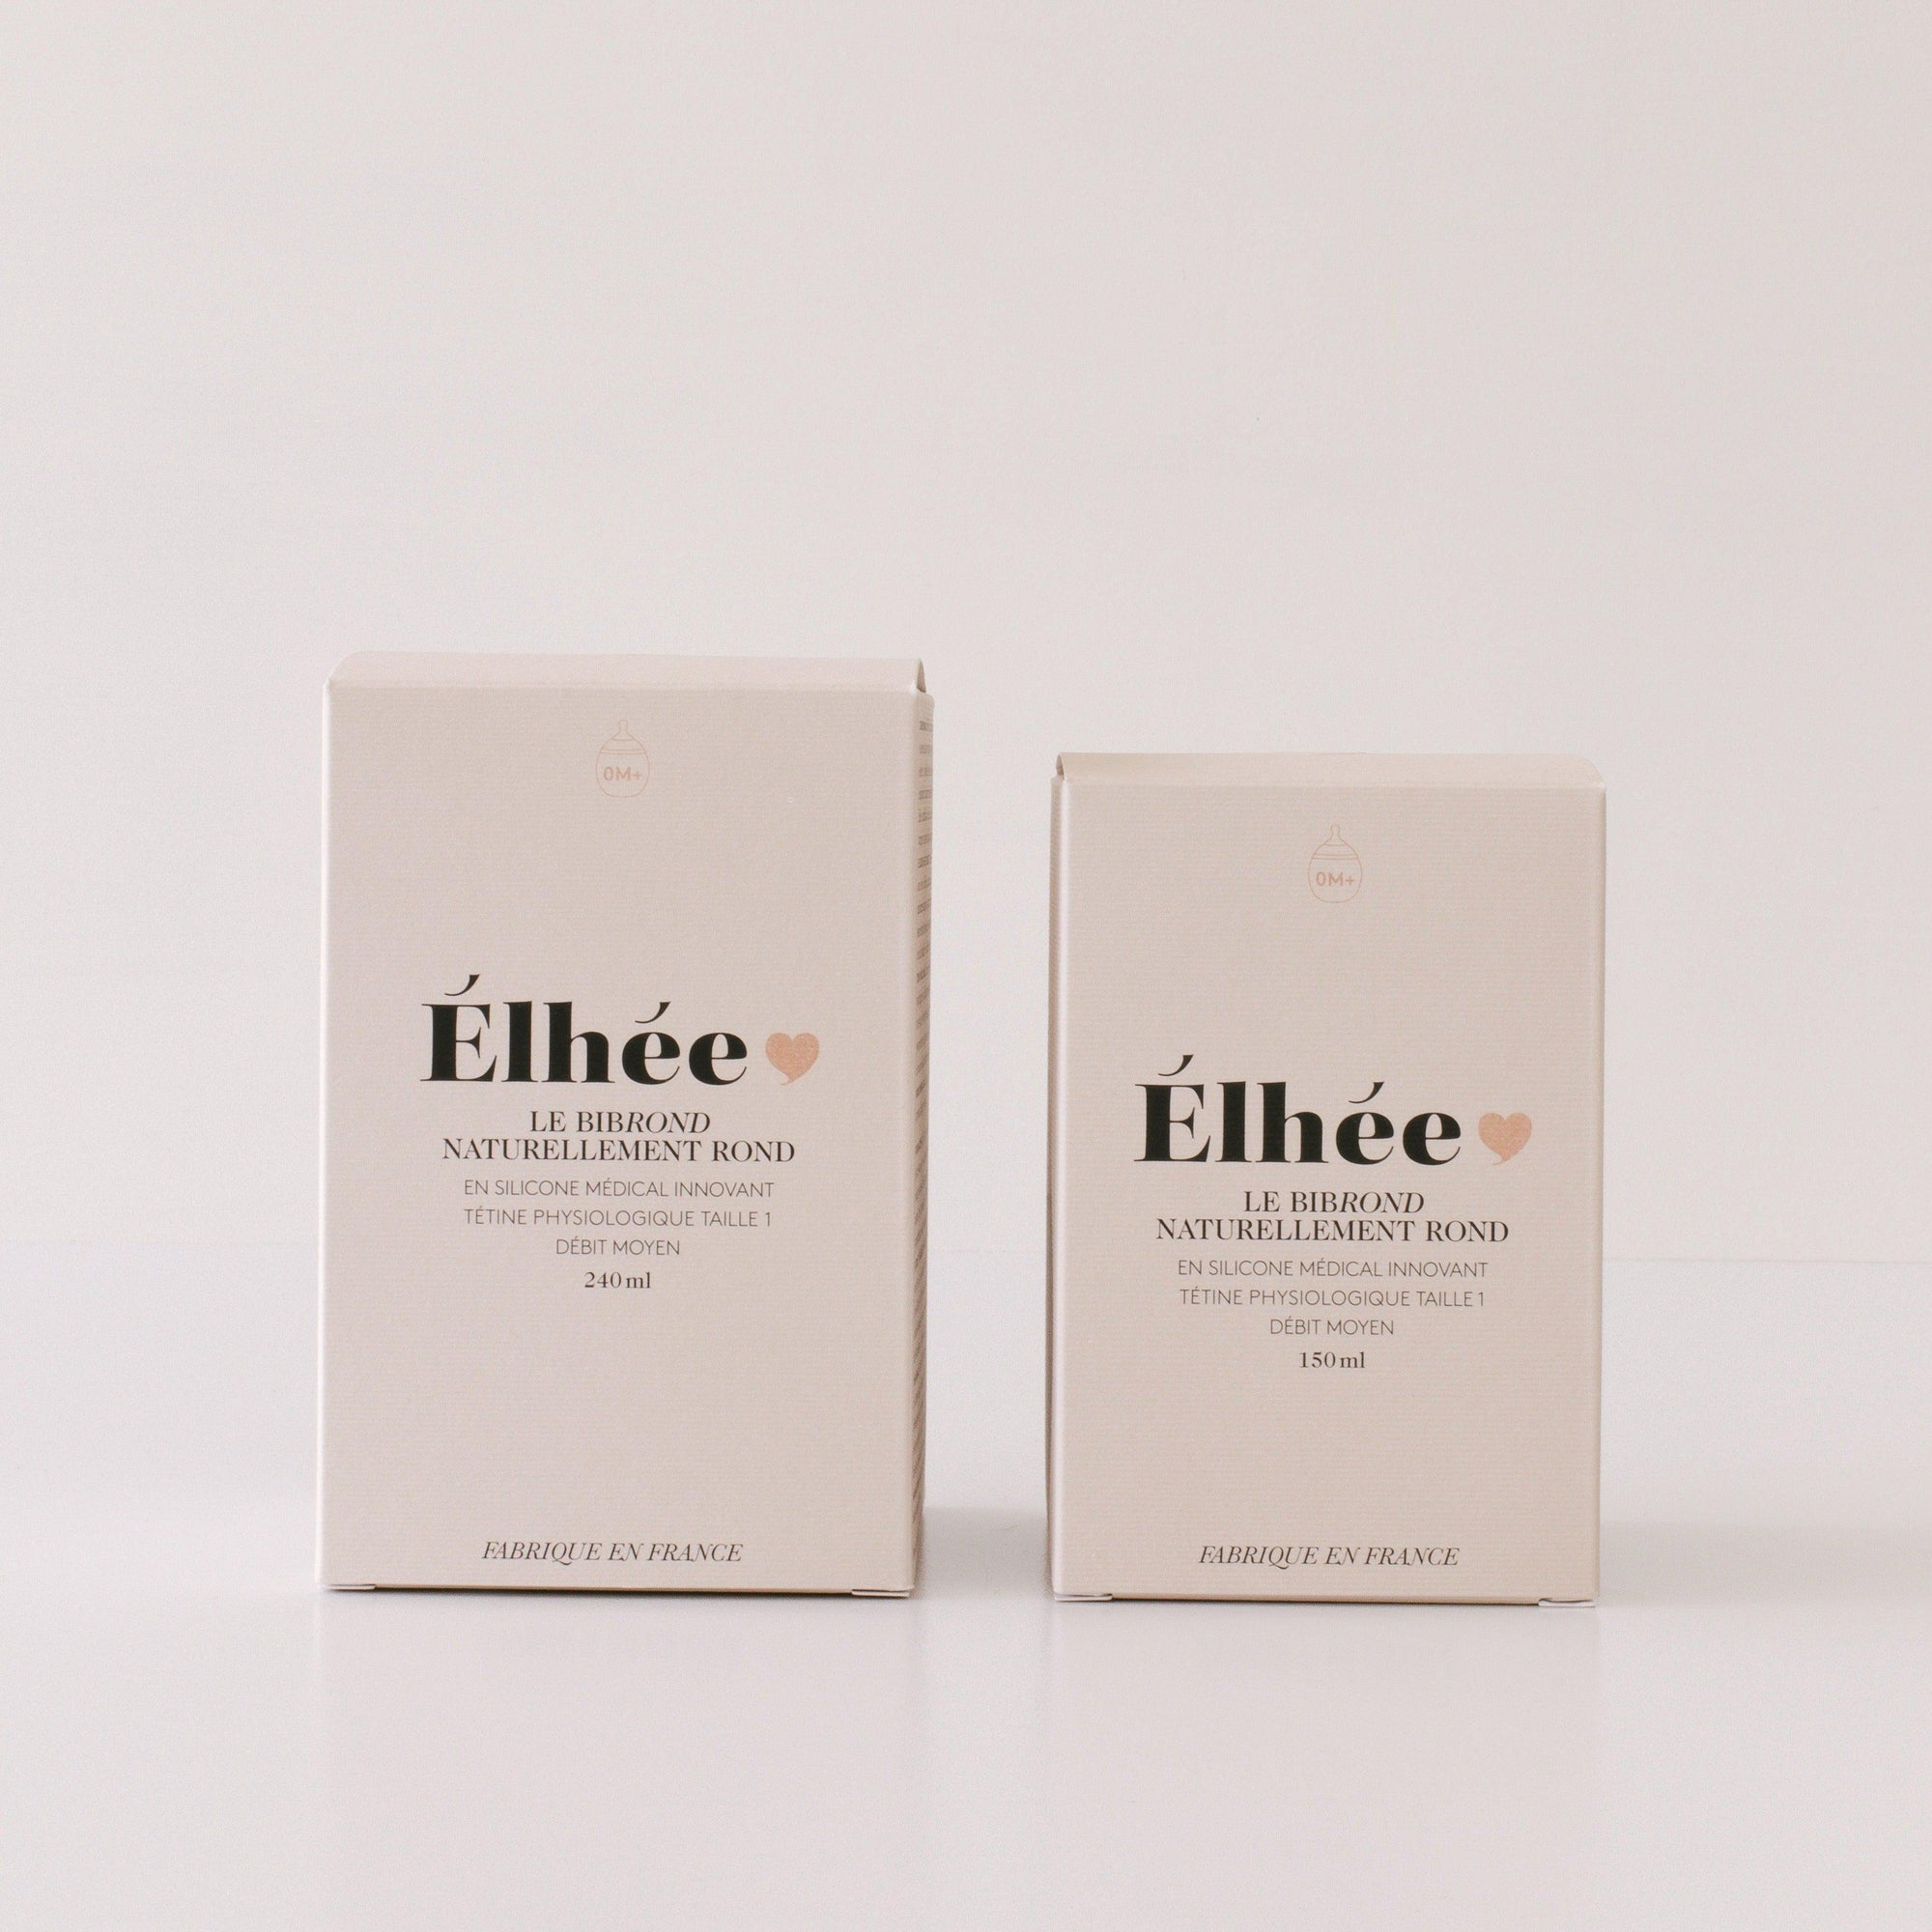 Two boxes of Elhée France Bibrond bottles on a white surface.